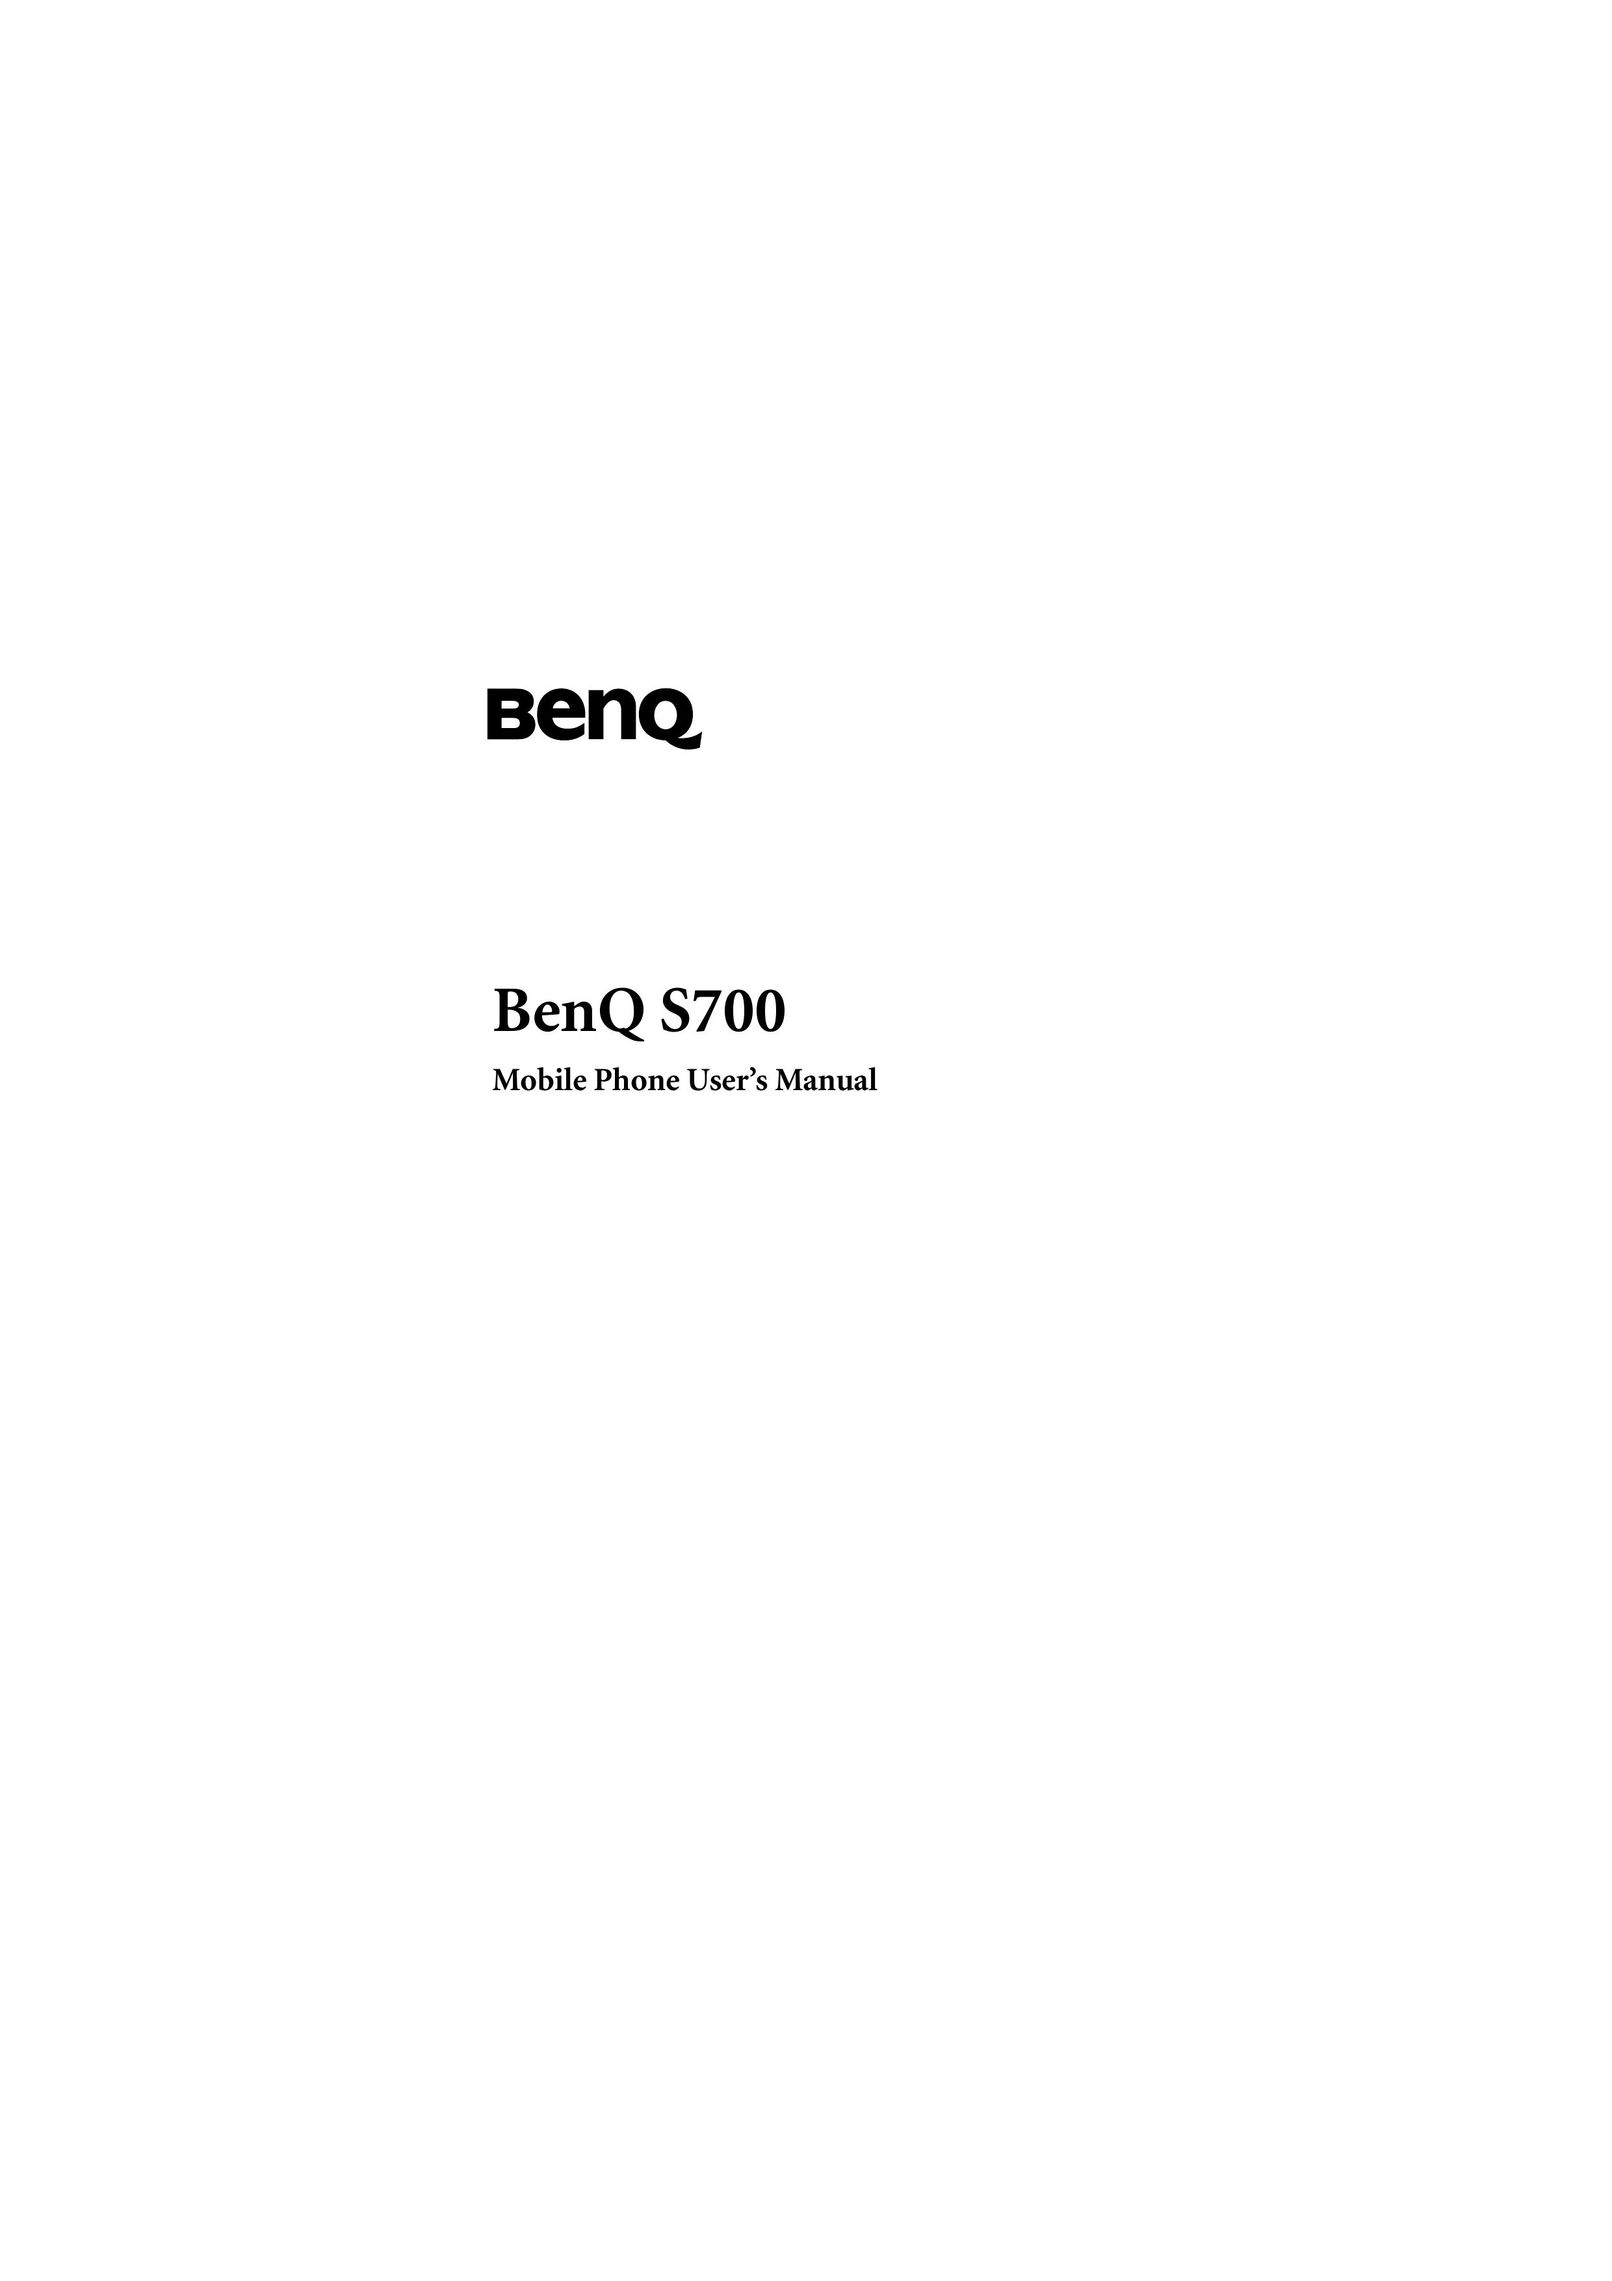 BenQ S700 Cell Phone User Manual